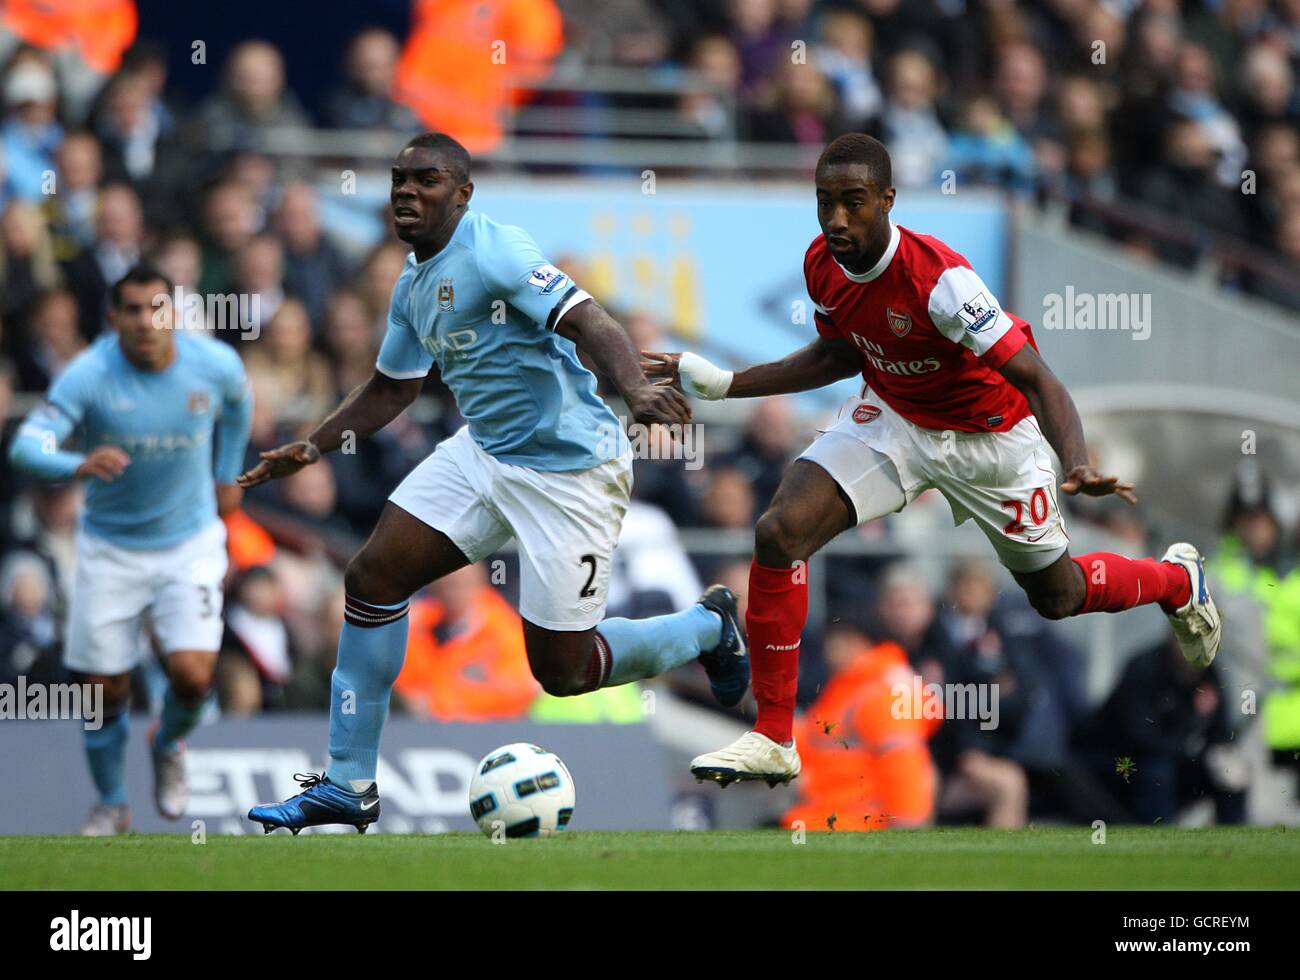 Soccer - Barclays Premier League - Manchester City v Arsenal - City of Manchester Stadium. Manchester City's Micah Richards and Arsenal's Johan Djourou (right) battle for the ball Stock Photo